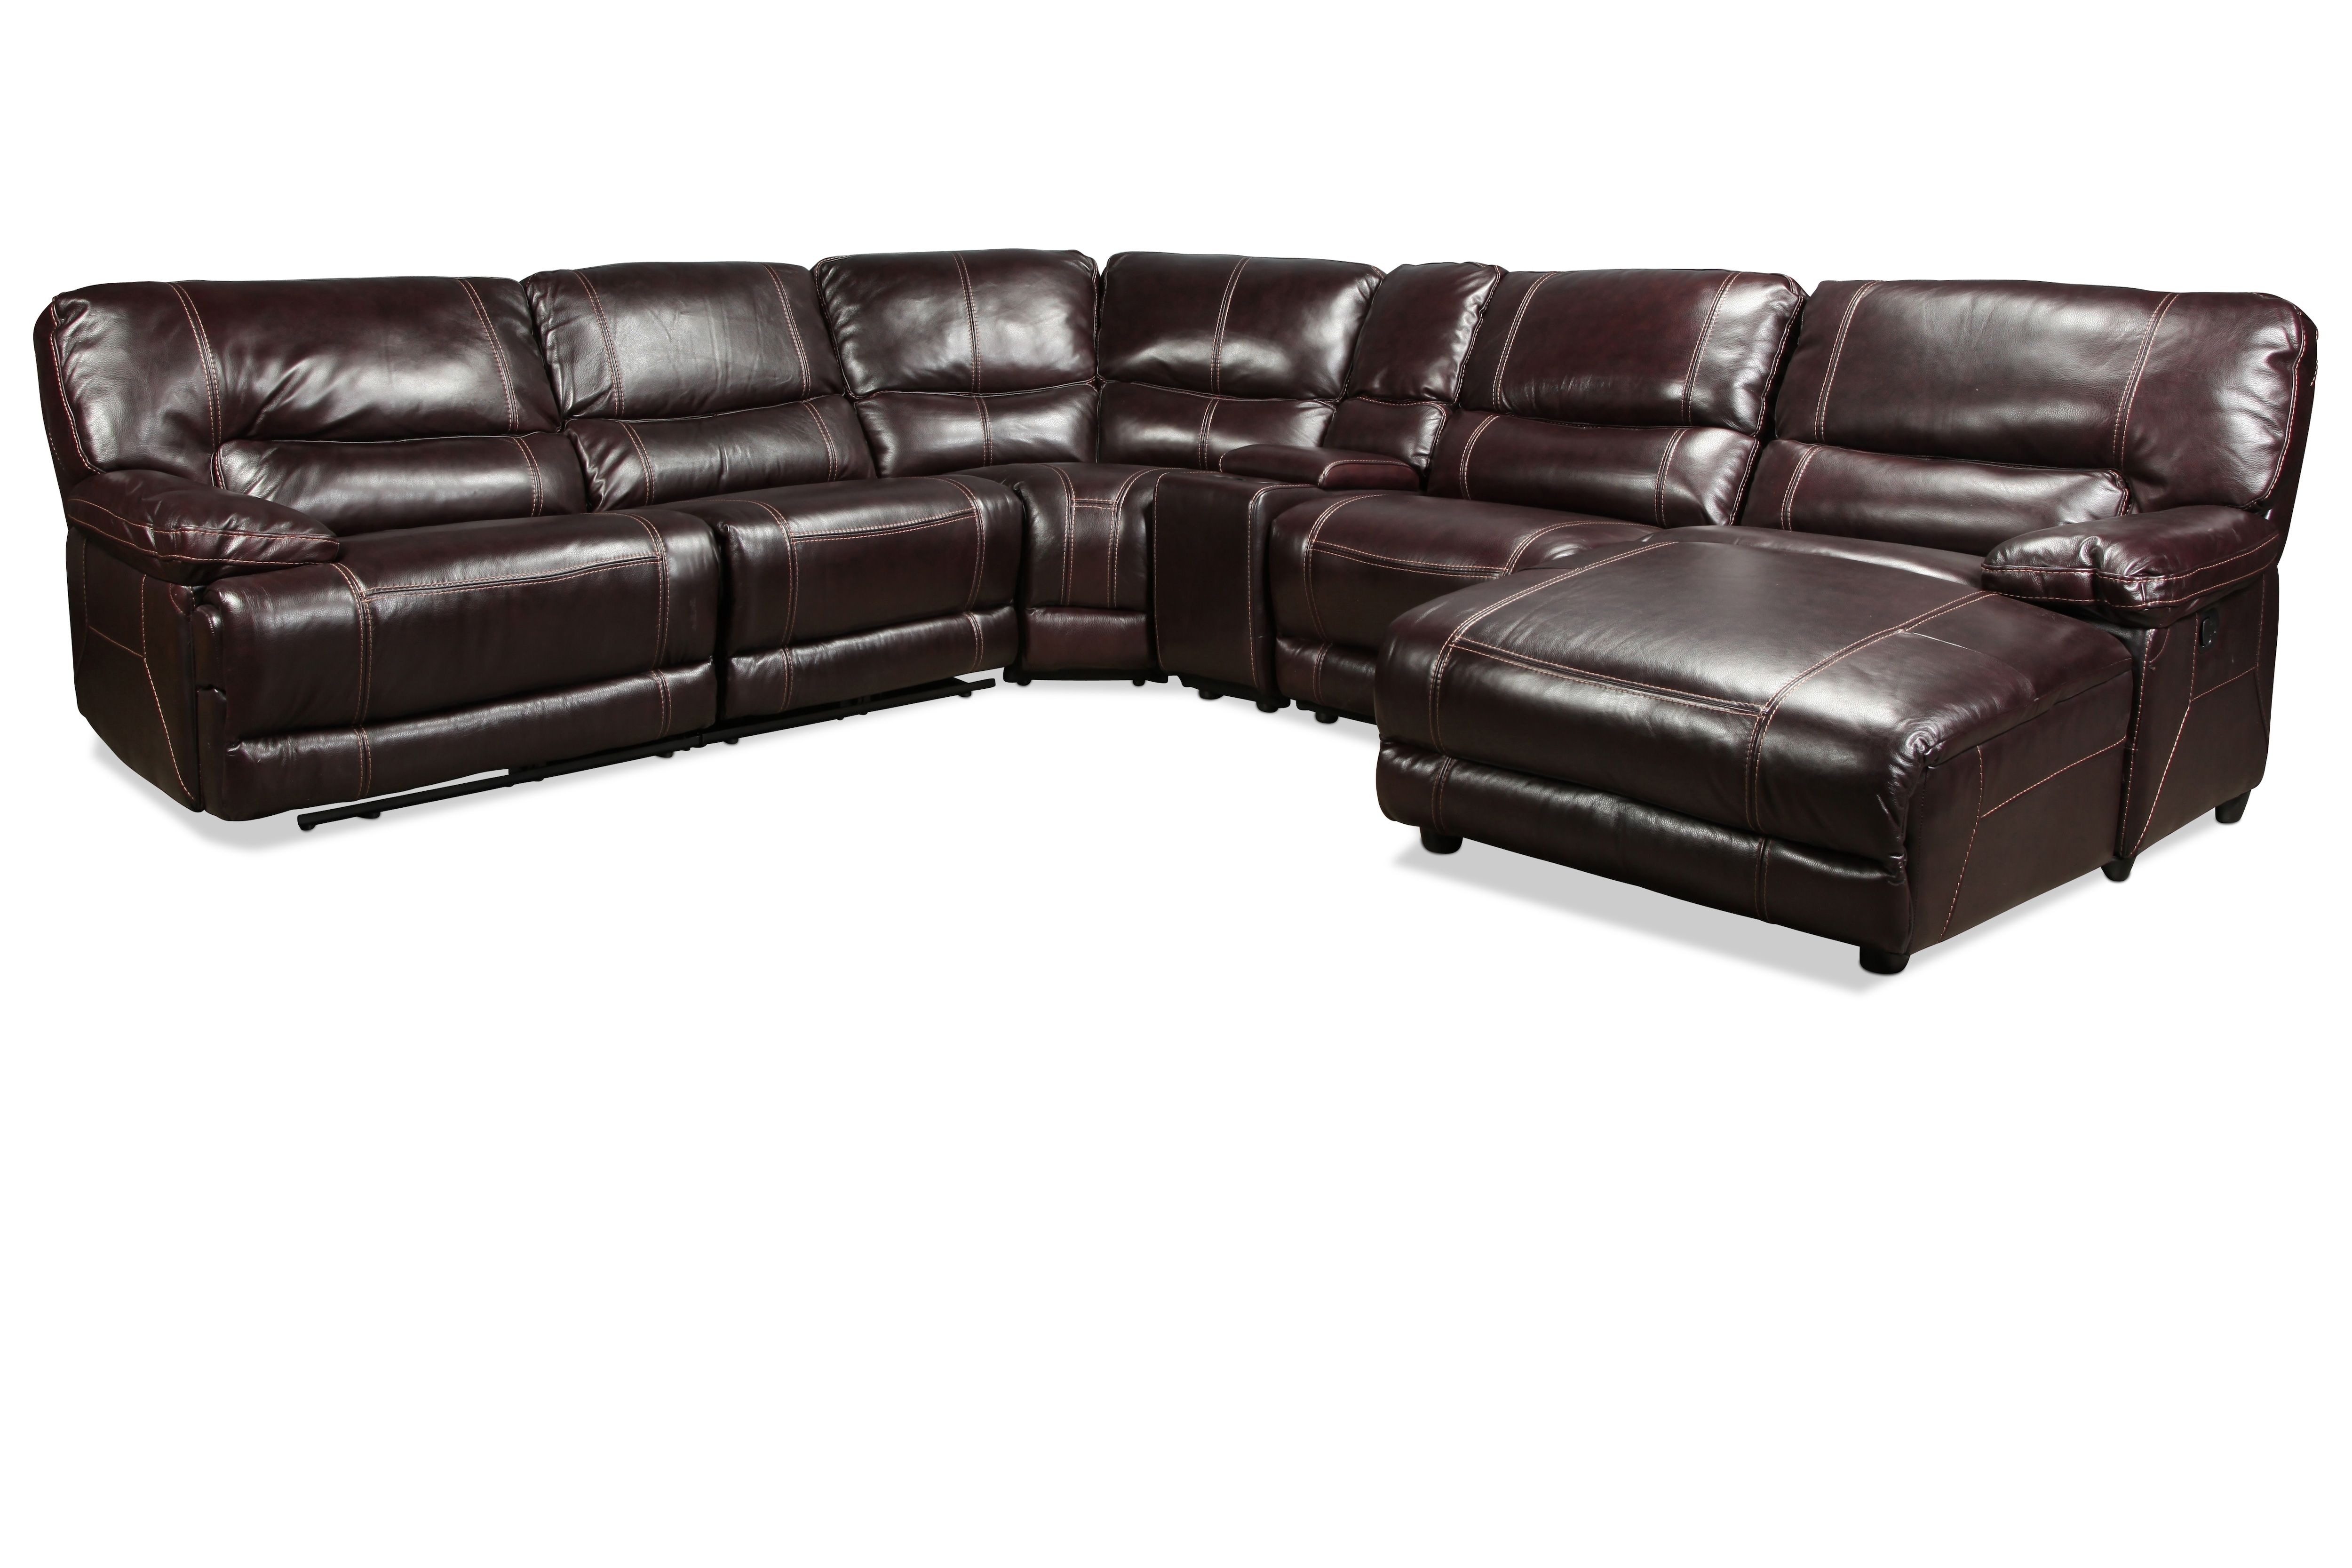 Sectionals | Levin Furniture Regarding Tatum Dark Grey 2 Piece Sectionals With Raf Chaise (View 11 of 30)